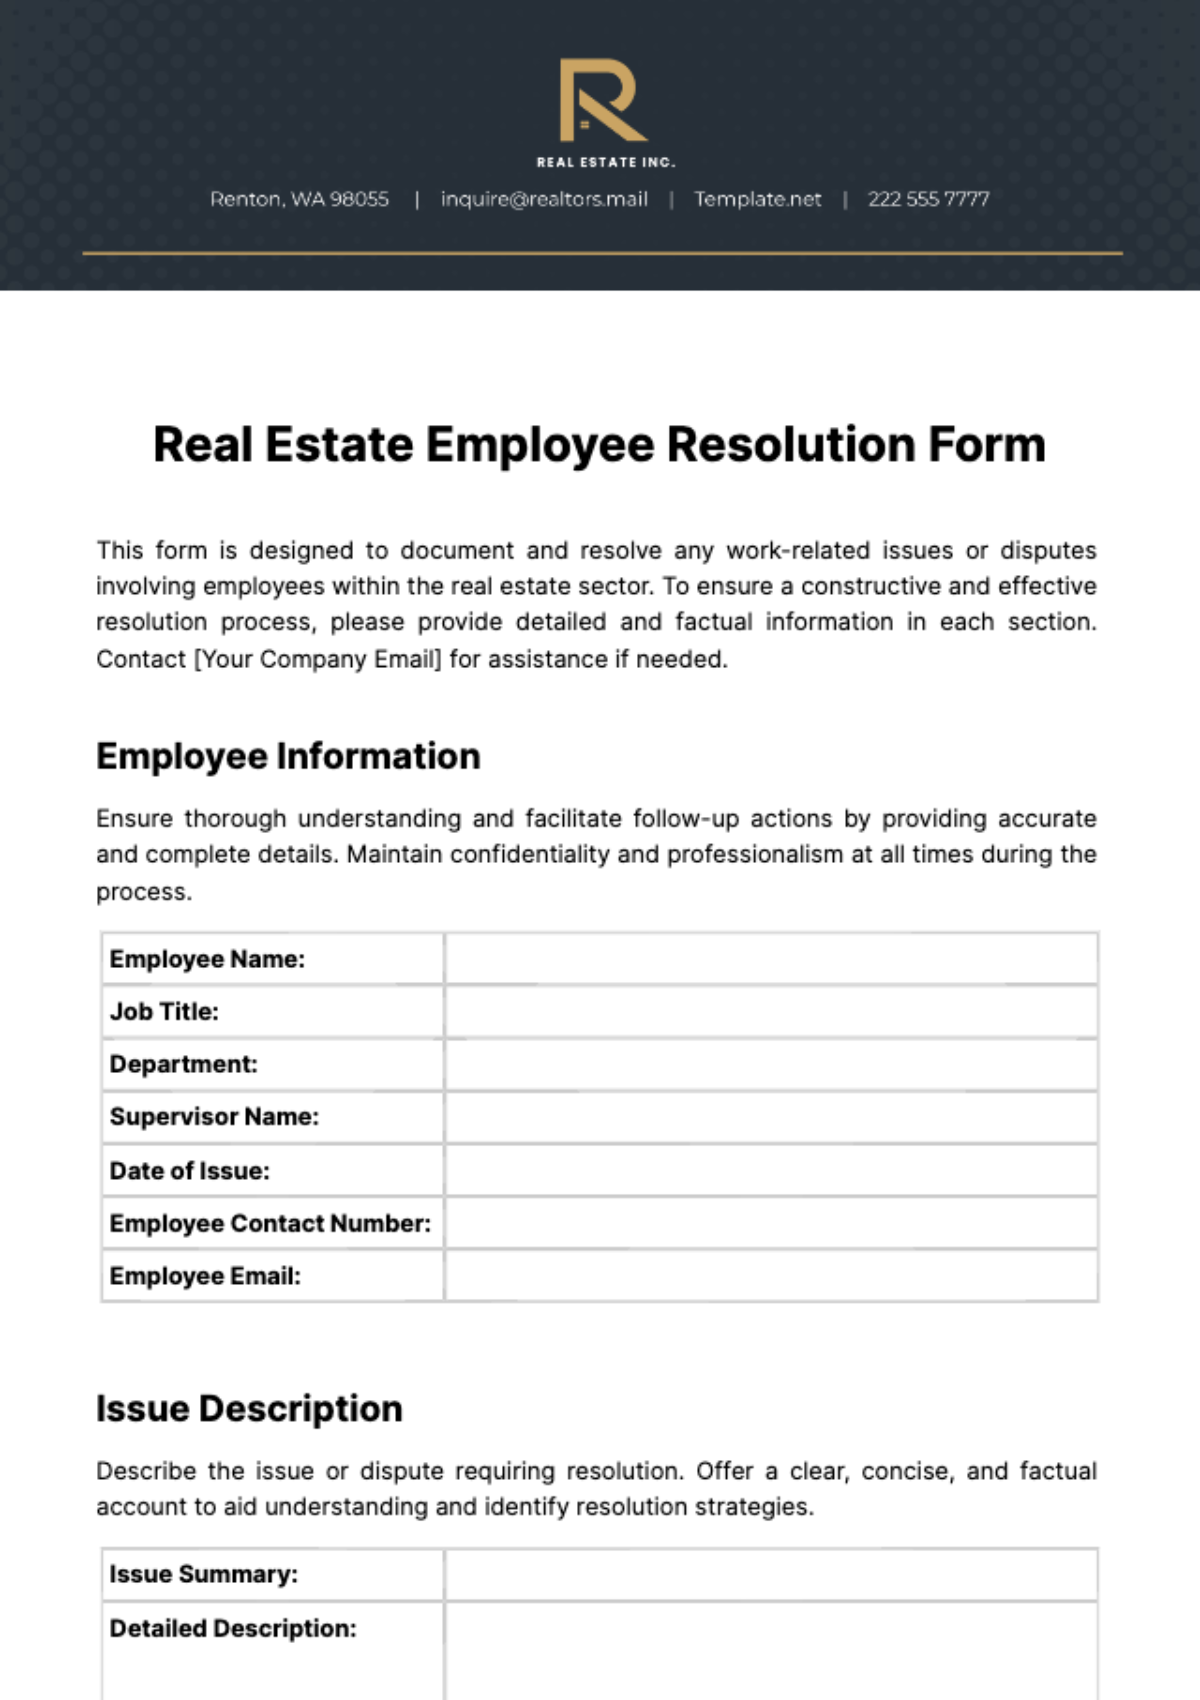 Real Estate Employee Resolution Form Template